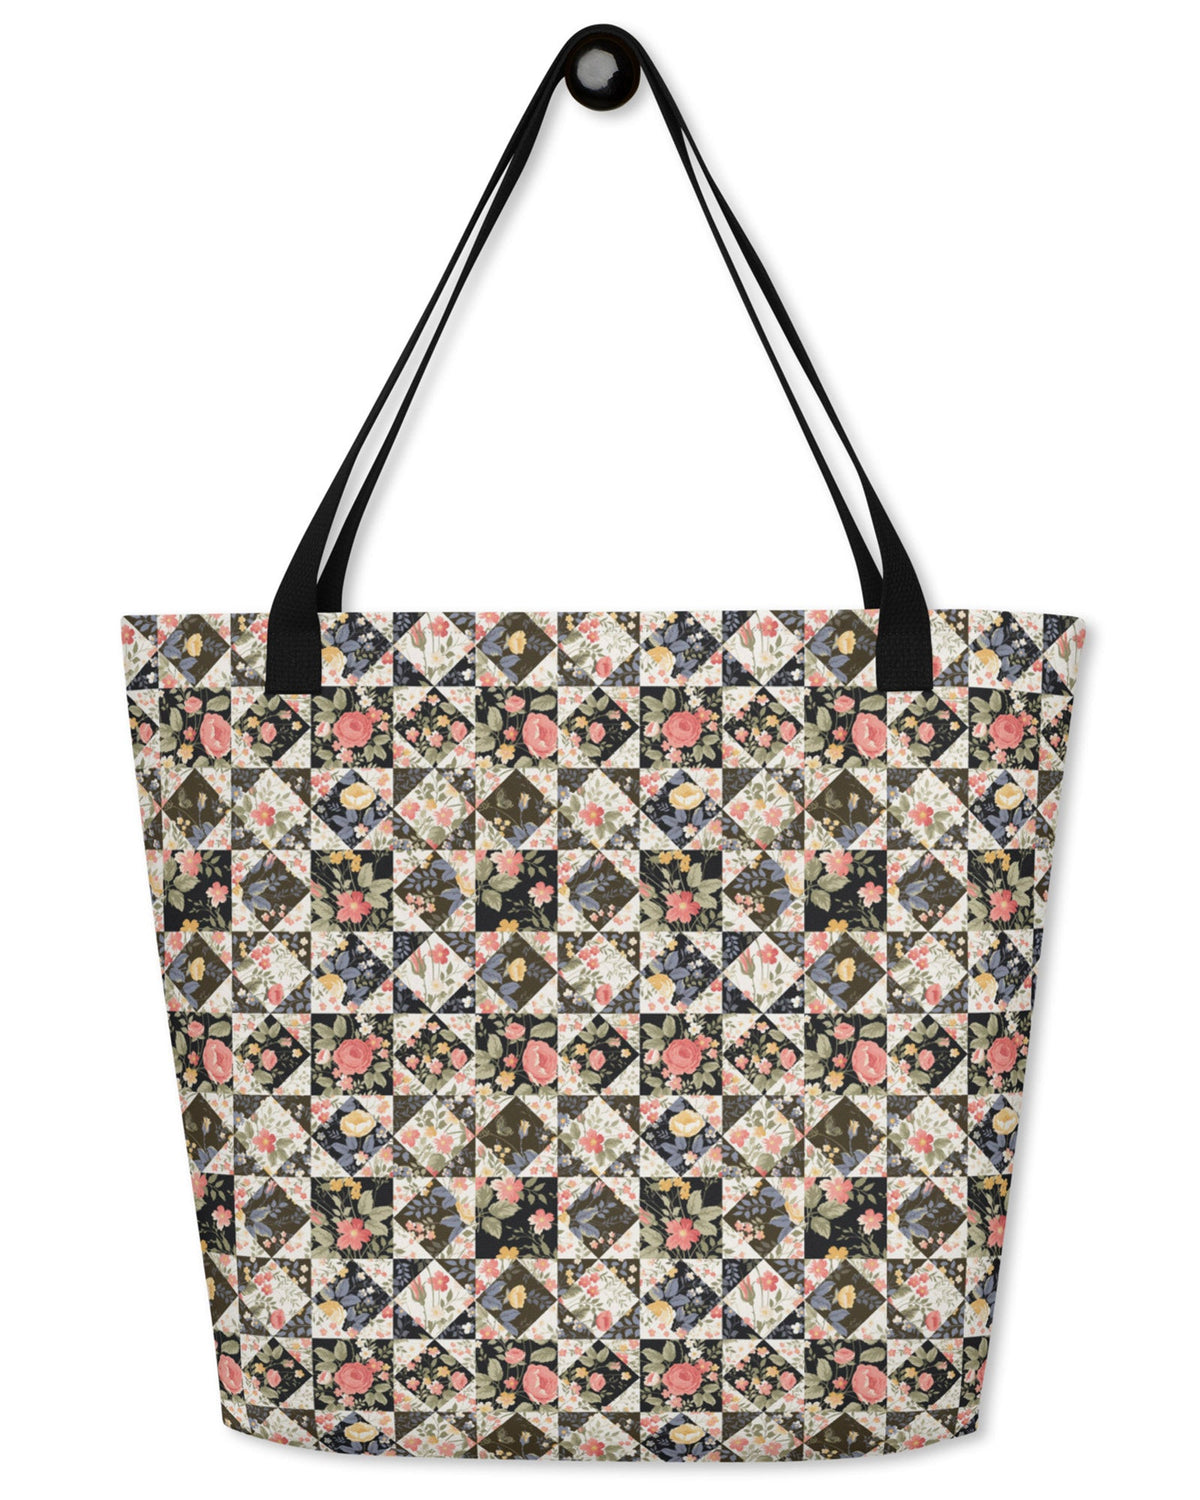 Patchwork Quilt Open Tote Bag